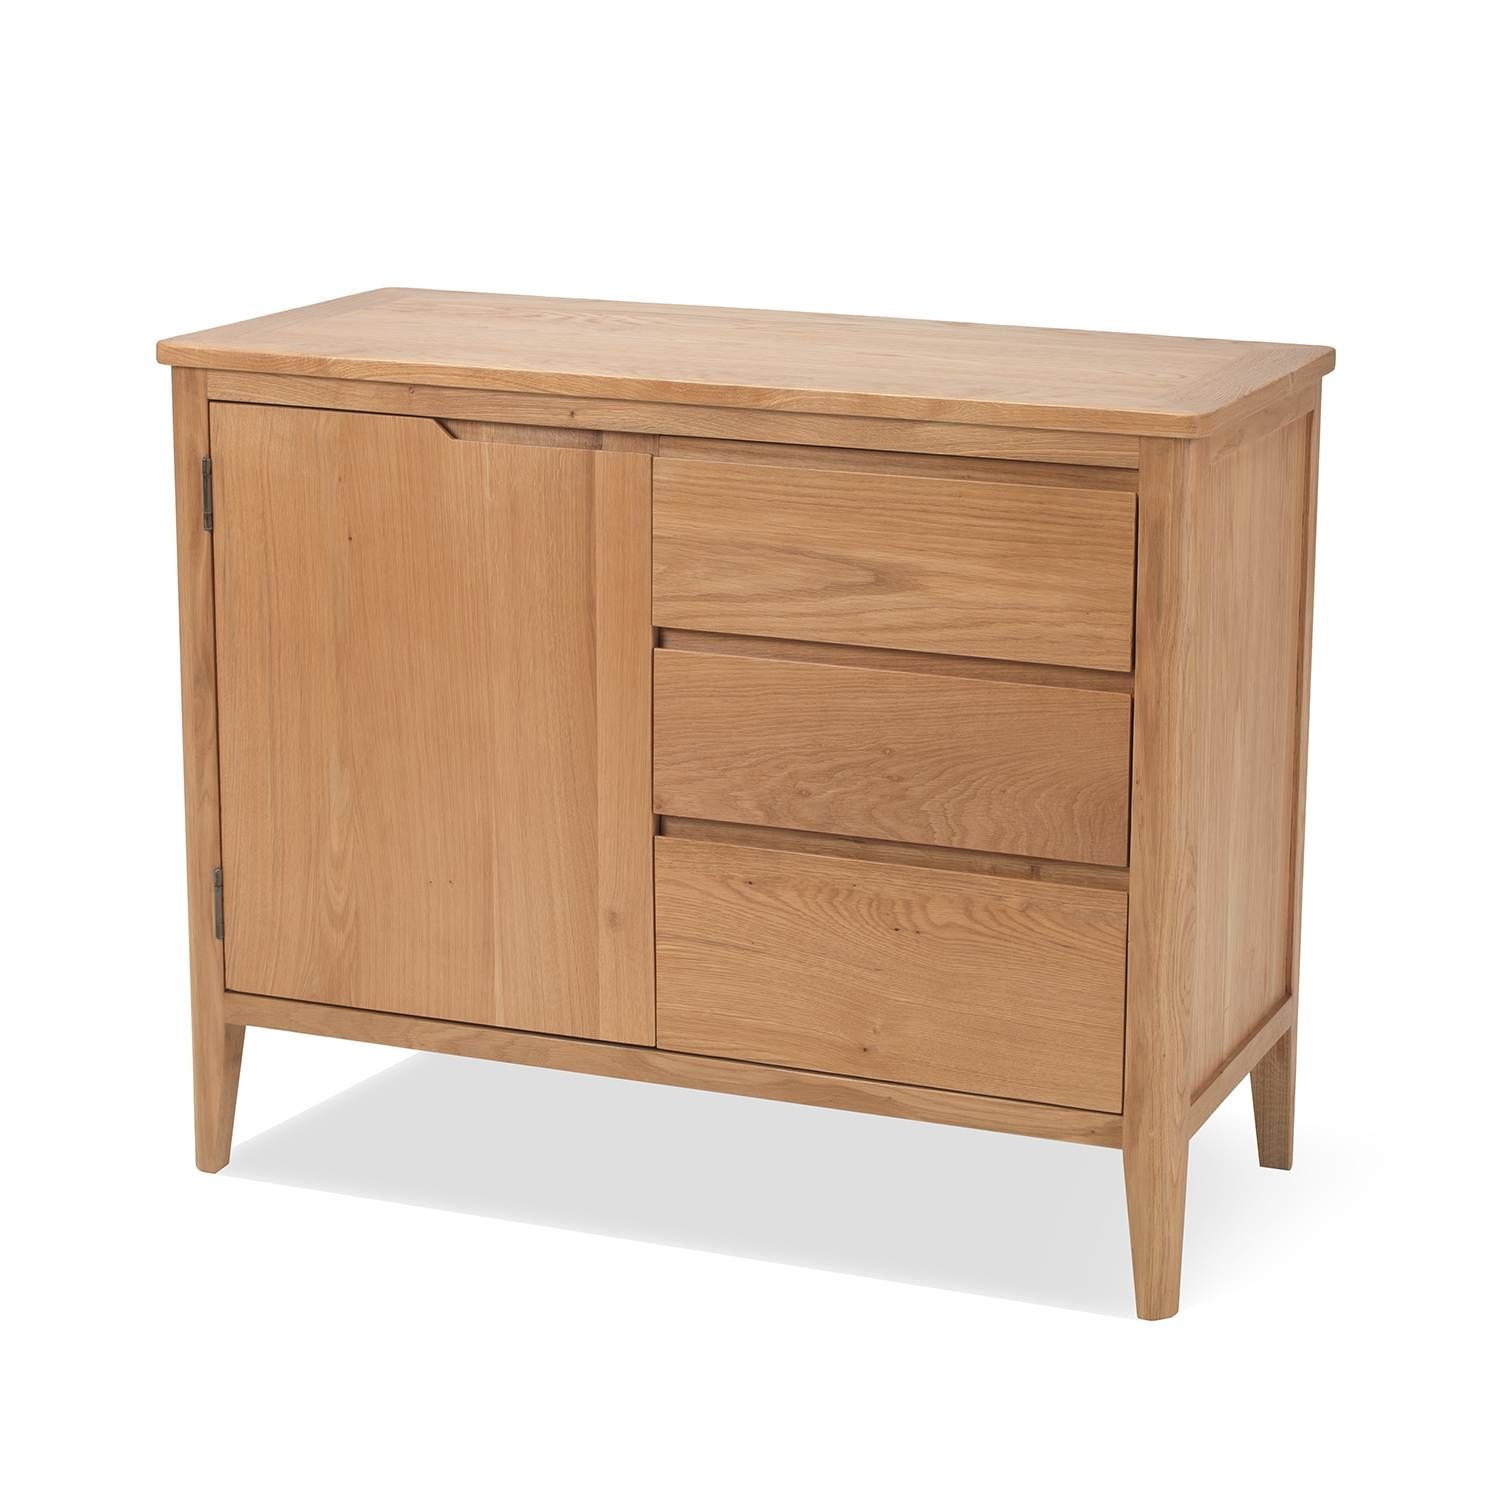 Cadley Oak Small Sideboard With Drawers – Lifestyle Furniture Uk Regarding Small Wooden Sideboard (Photo 13 of 20)